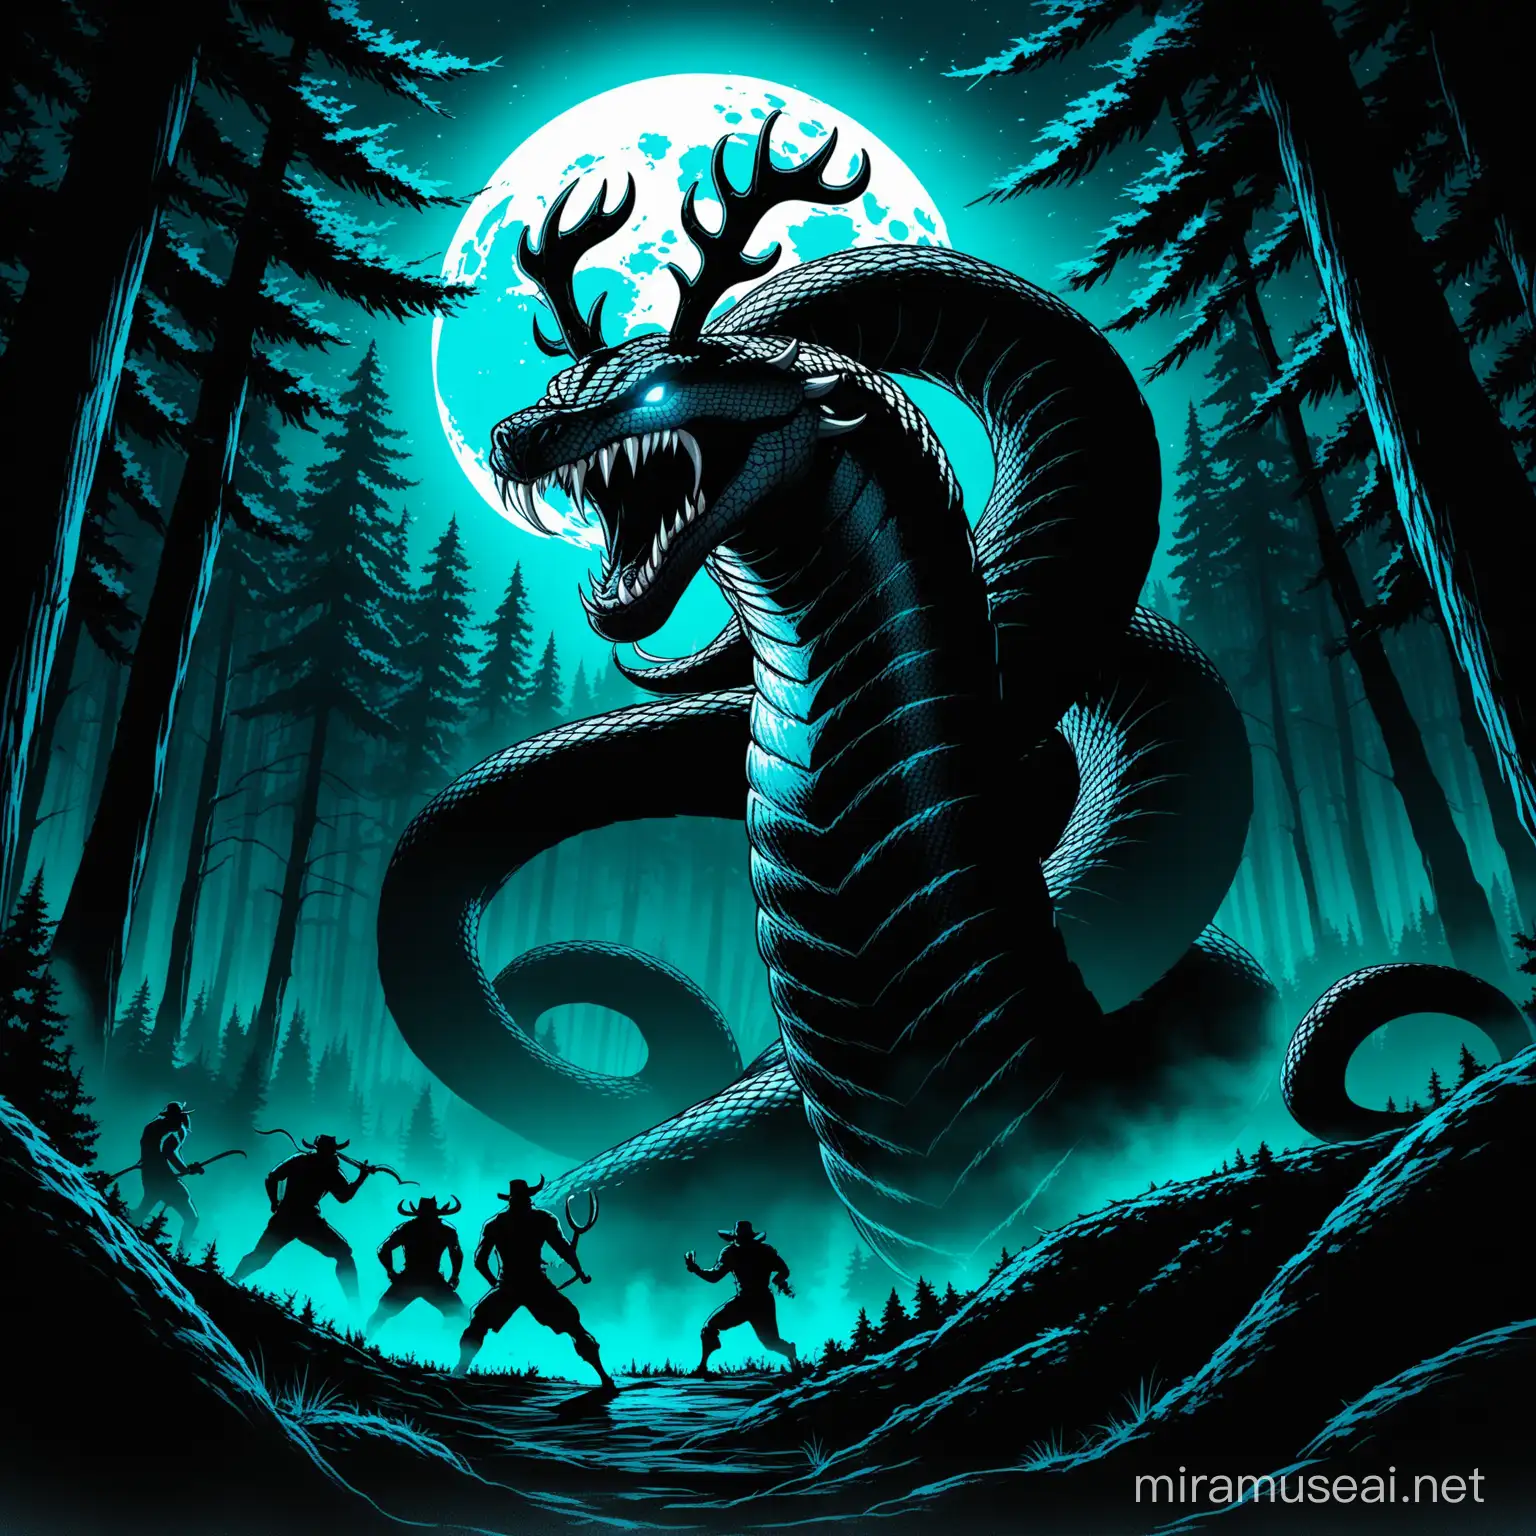 Giant-Cobra with antlers (noir style)
appreance-noir/black/whte/full body/neon blue eyes(only)/ baring fangs/attacking/angry/big antlers on head,
background-noir /forest/campers/moon/night